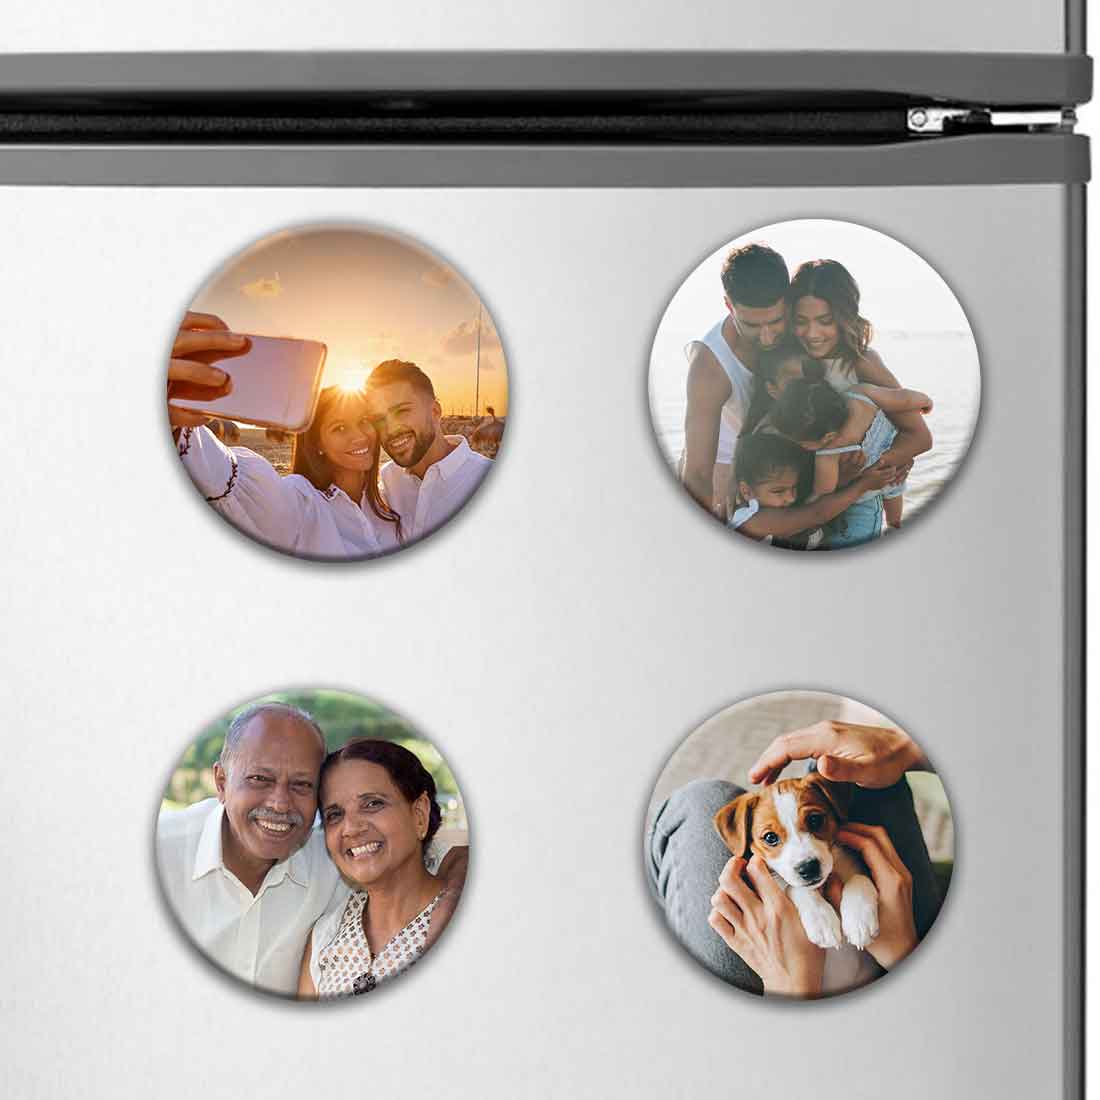 Personalised Fridge Magnets Photo Magnets for Fridge-3x3In